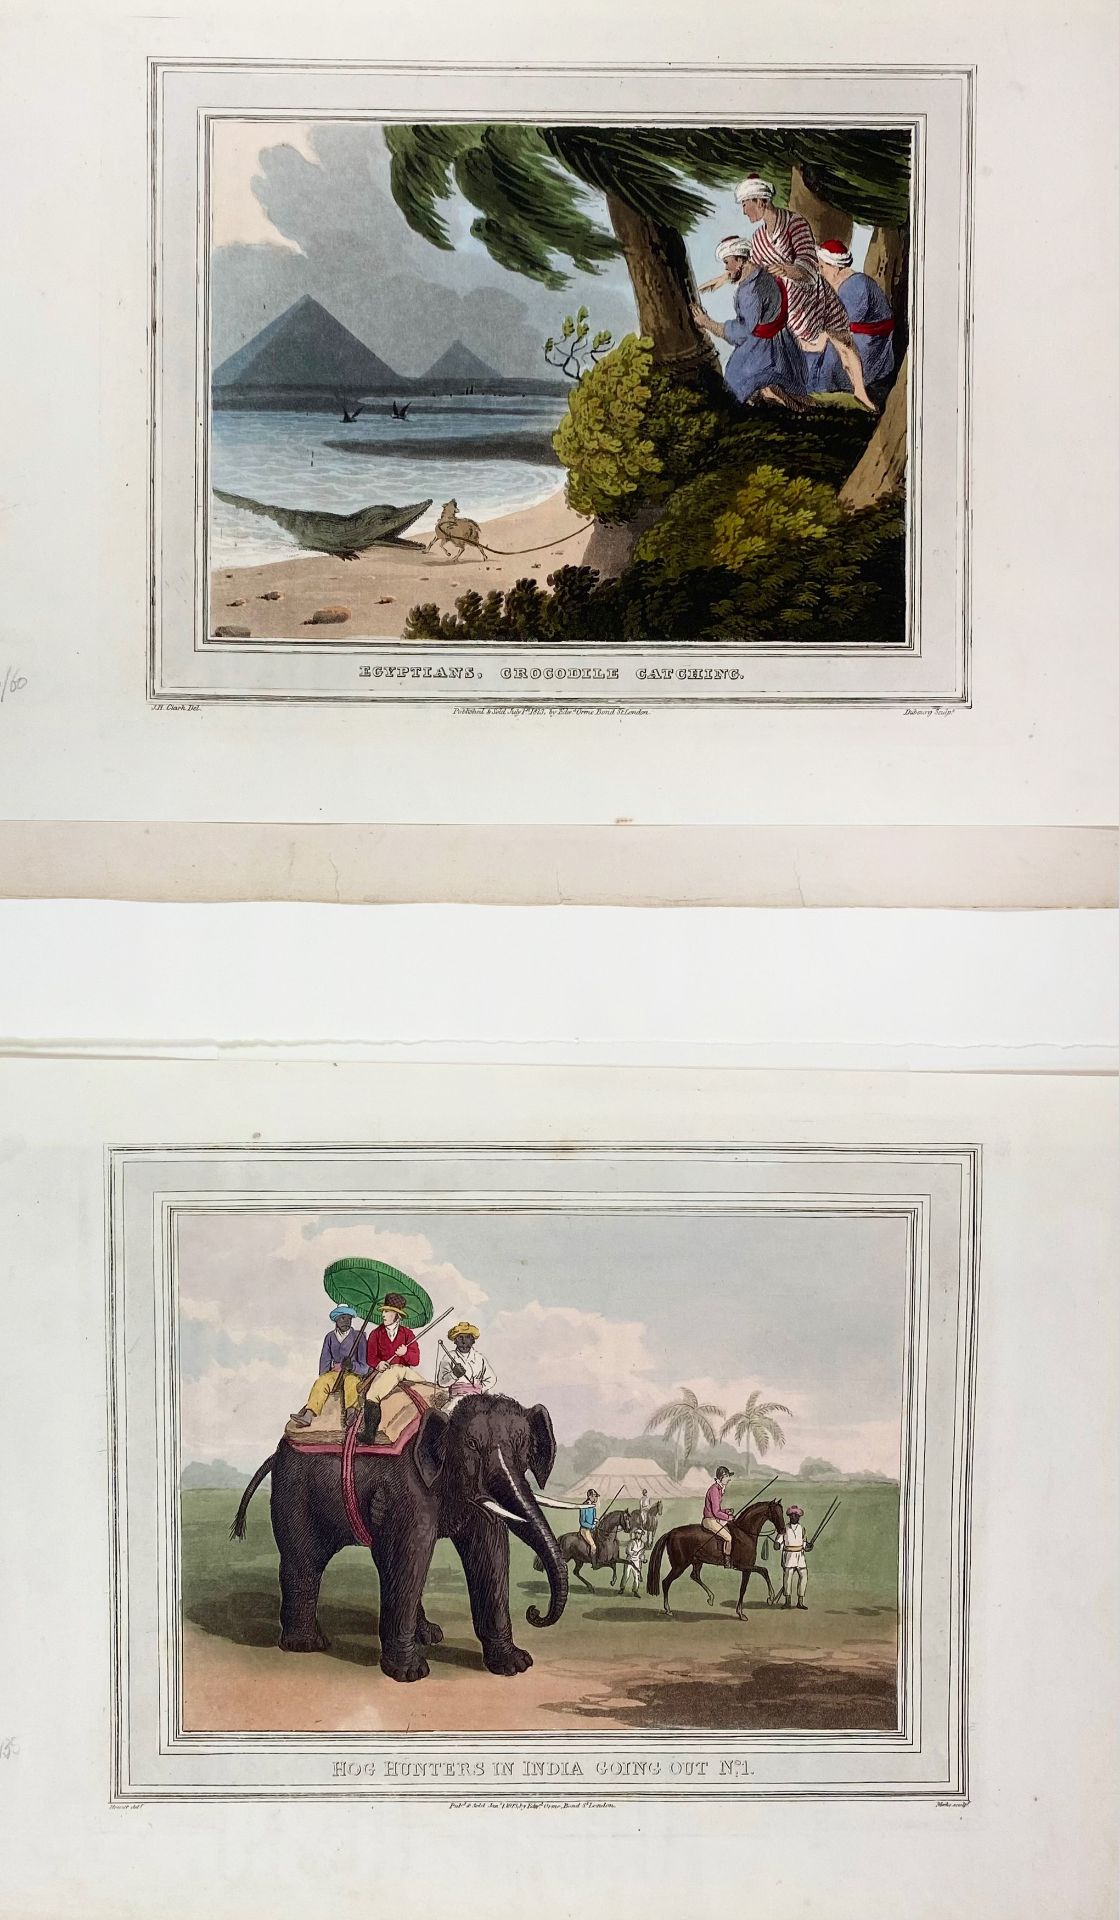 HUNTING -- COLLECTION of hunting/sporting aquatints. Lond., E. Orme, (1813). 9 aquatints